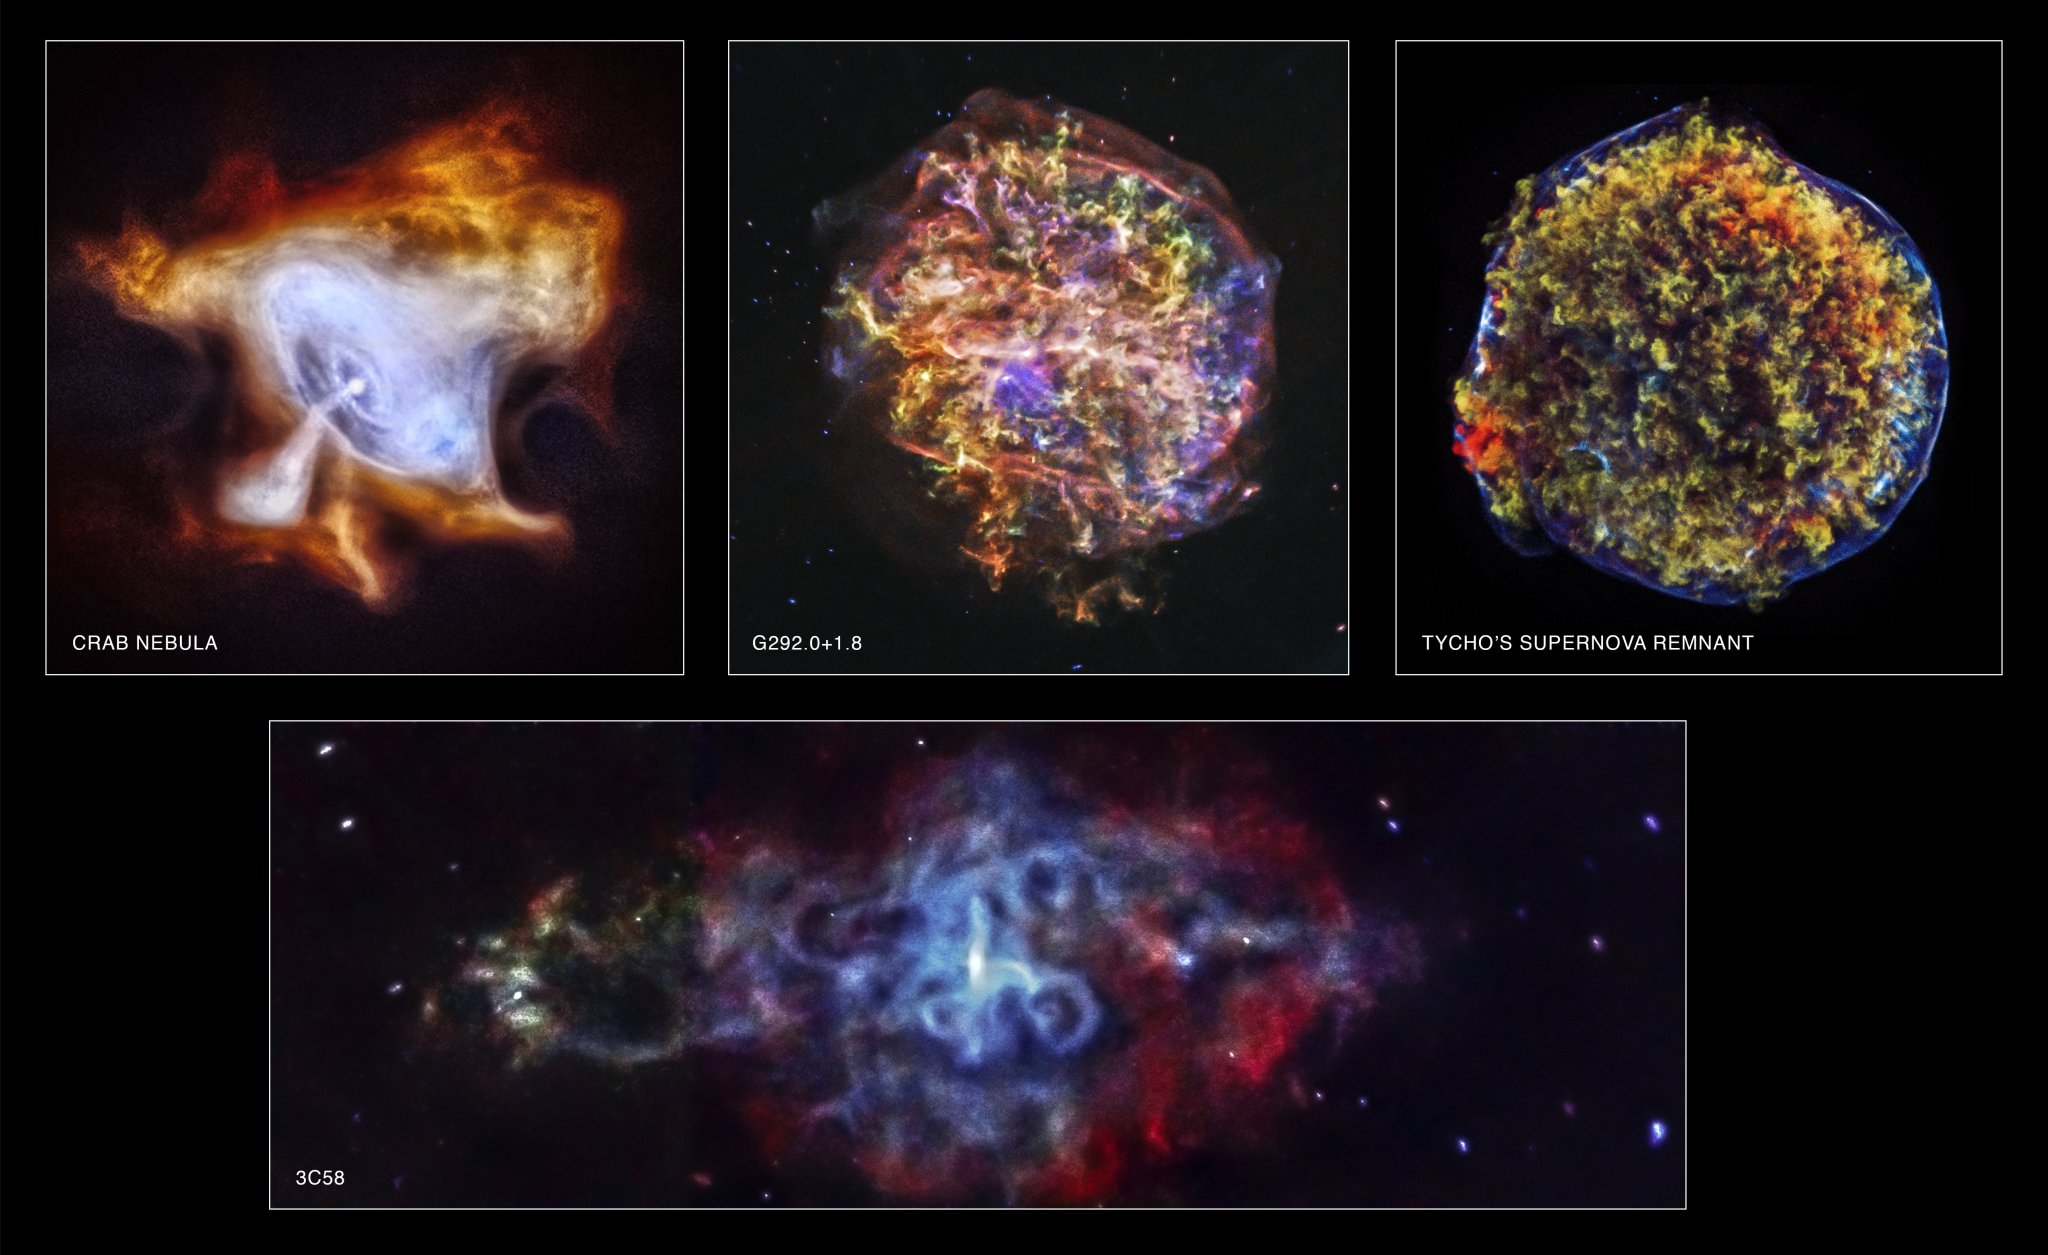 Four processed images of supernova remnants